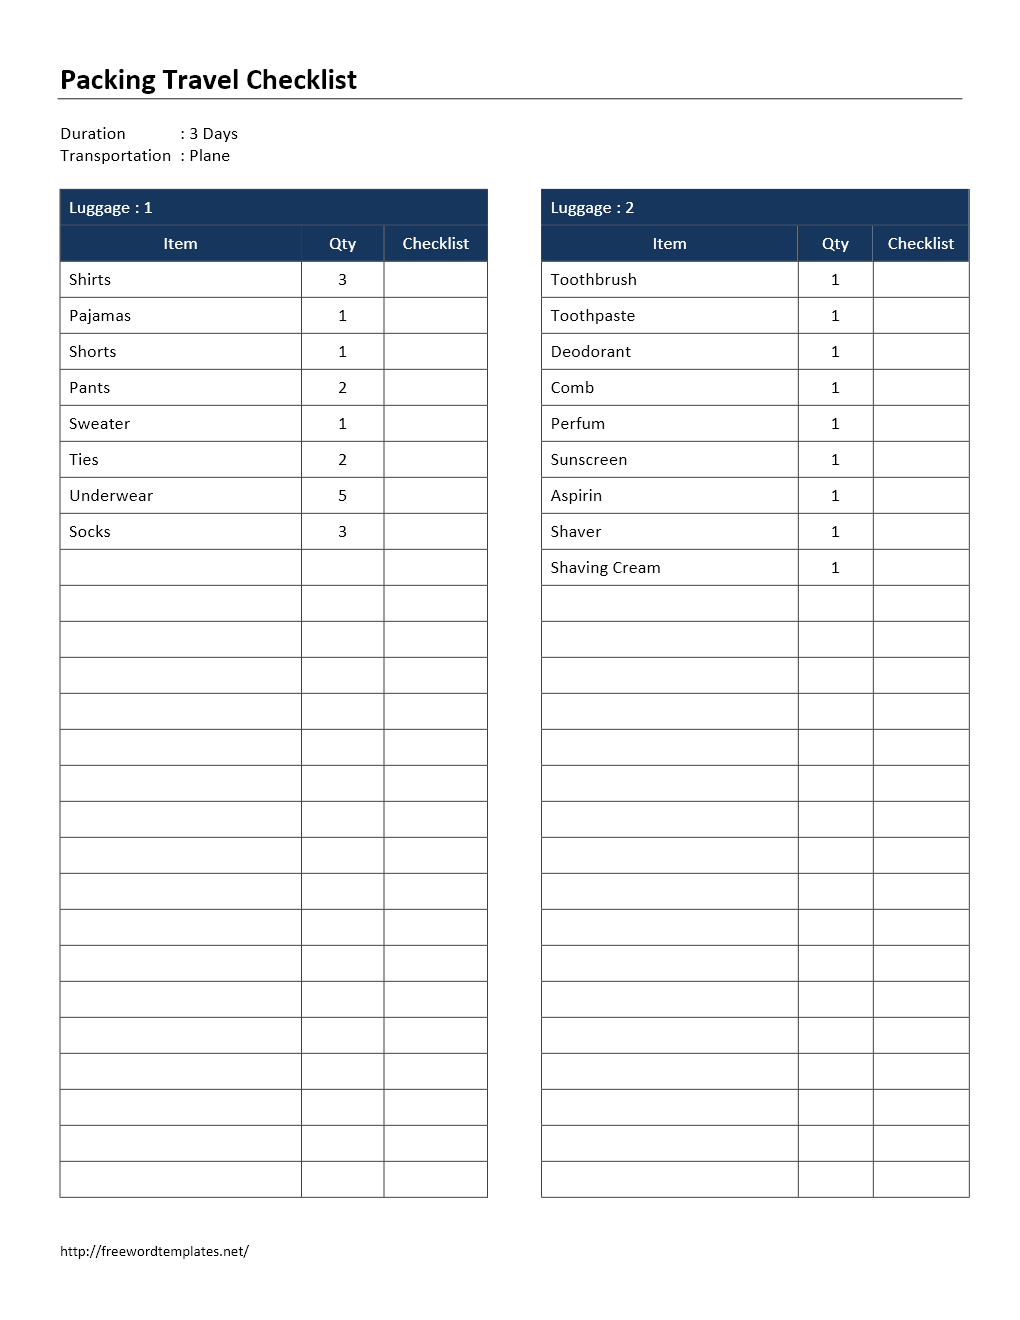 packing-travel-checklist-template